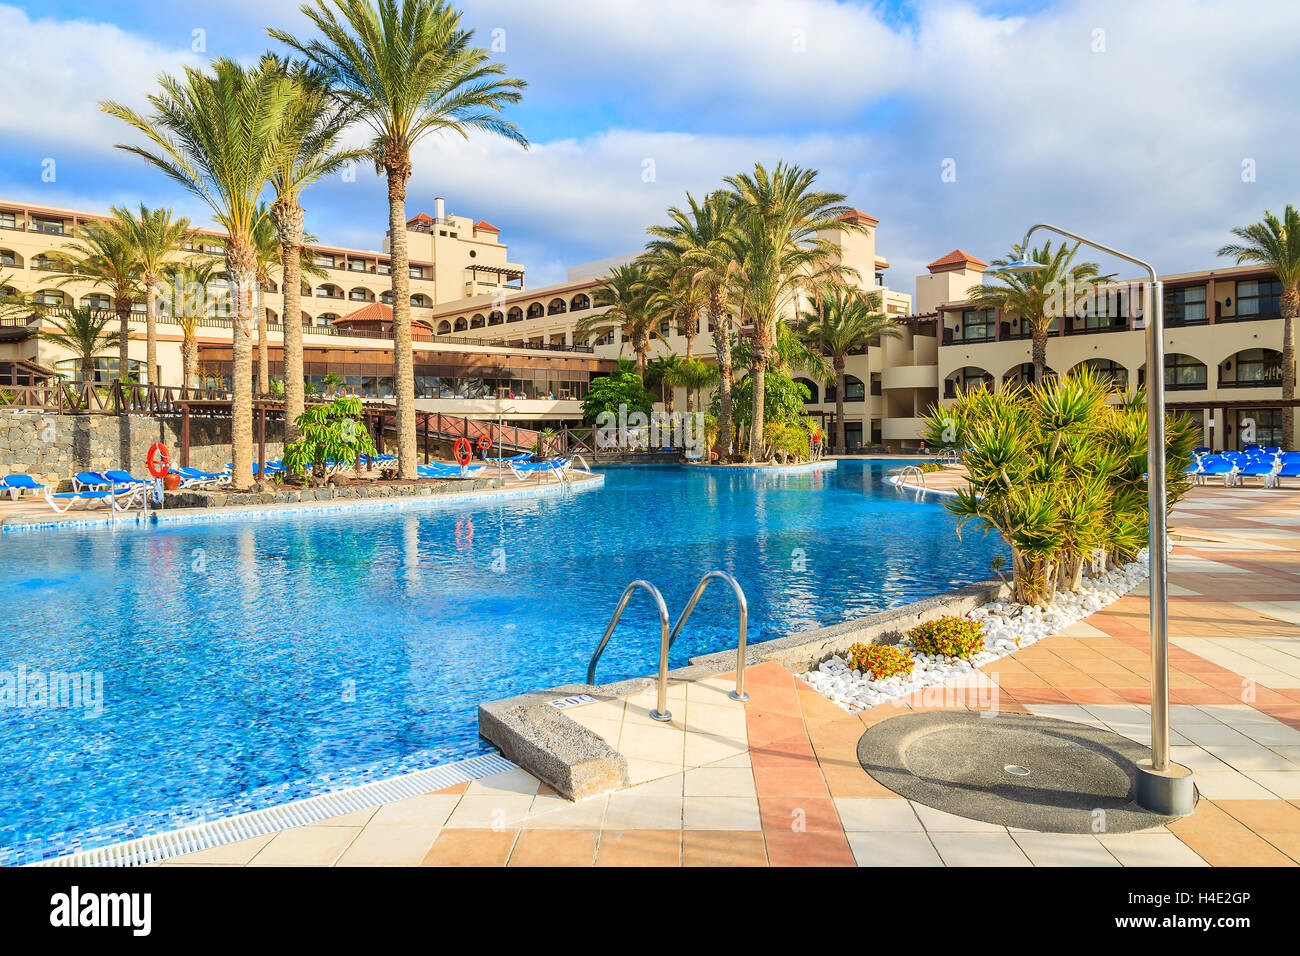 MORRO JABLE, FUERTEVENTURA - FEB 6, 2014: swimming pool of a luxury hotel Barcelo Jandia Mar in town of Morro Jable. This is a popular holiday destination for tourists on Fuerteventura island. Stock Photo